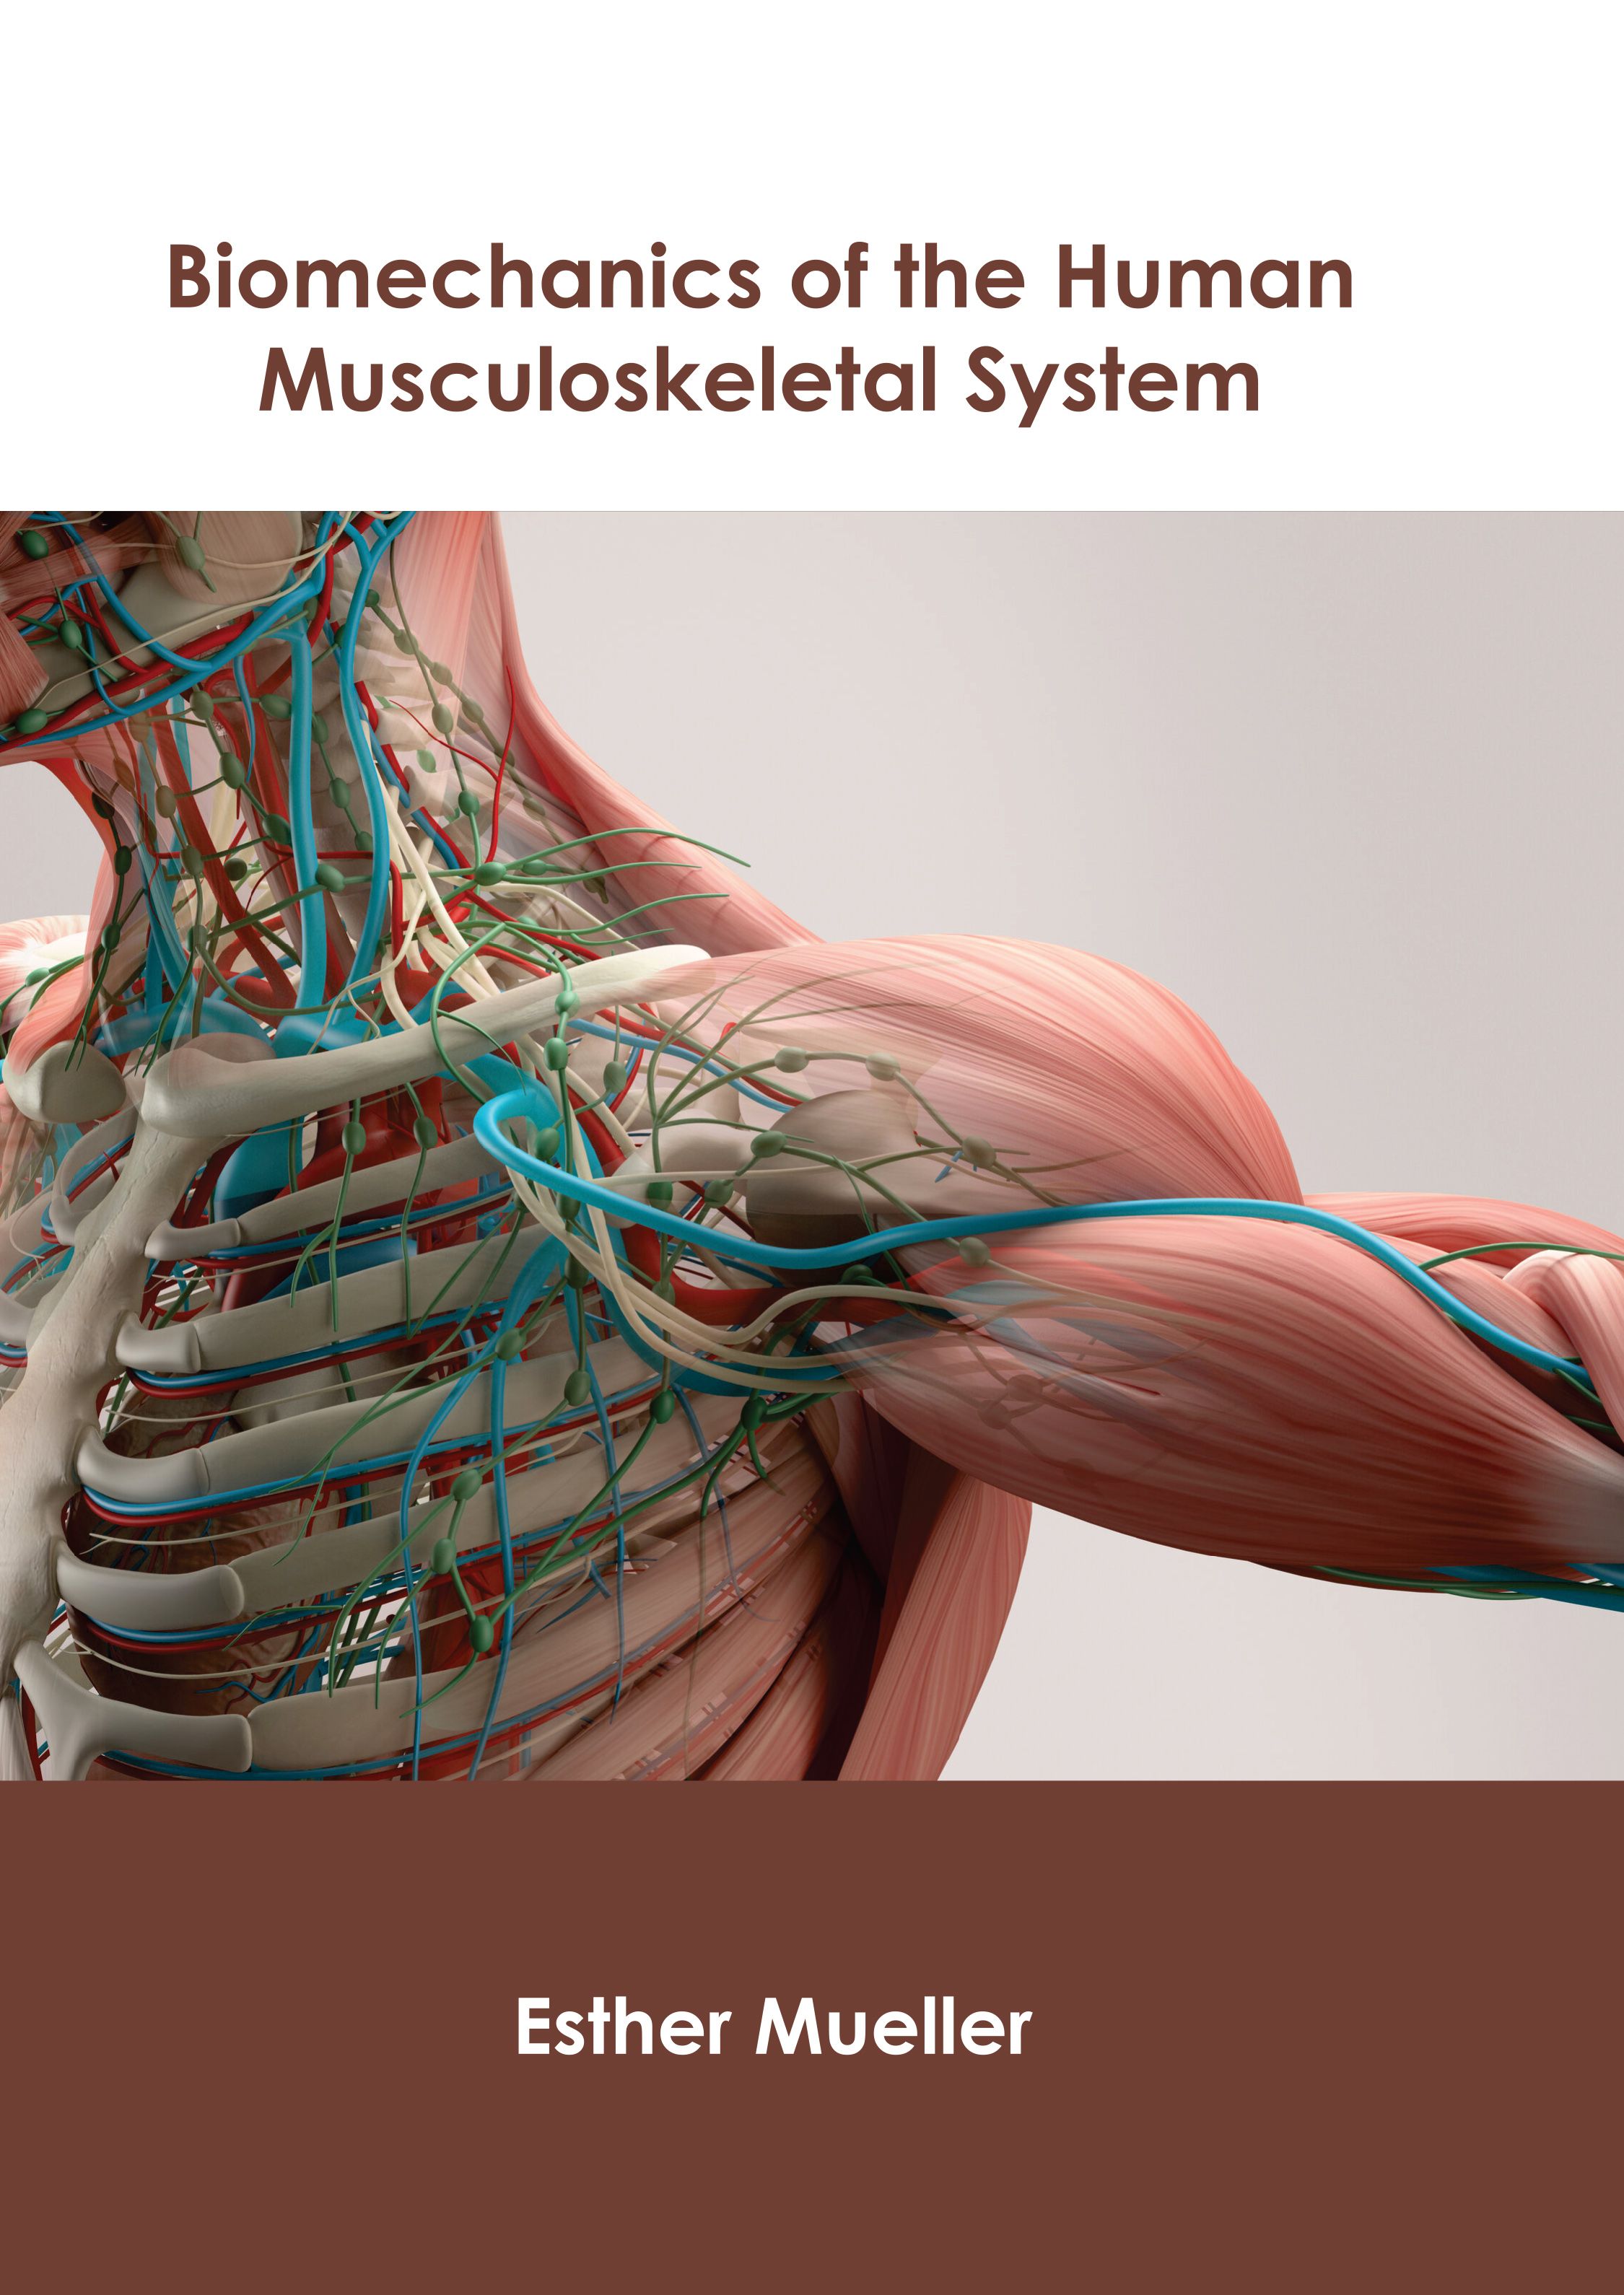 

exclusive-publishers/american-medical-publishers/biomechanics-of-the-human-musculoskeletal-system-9781639279326